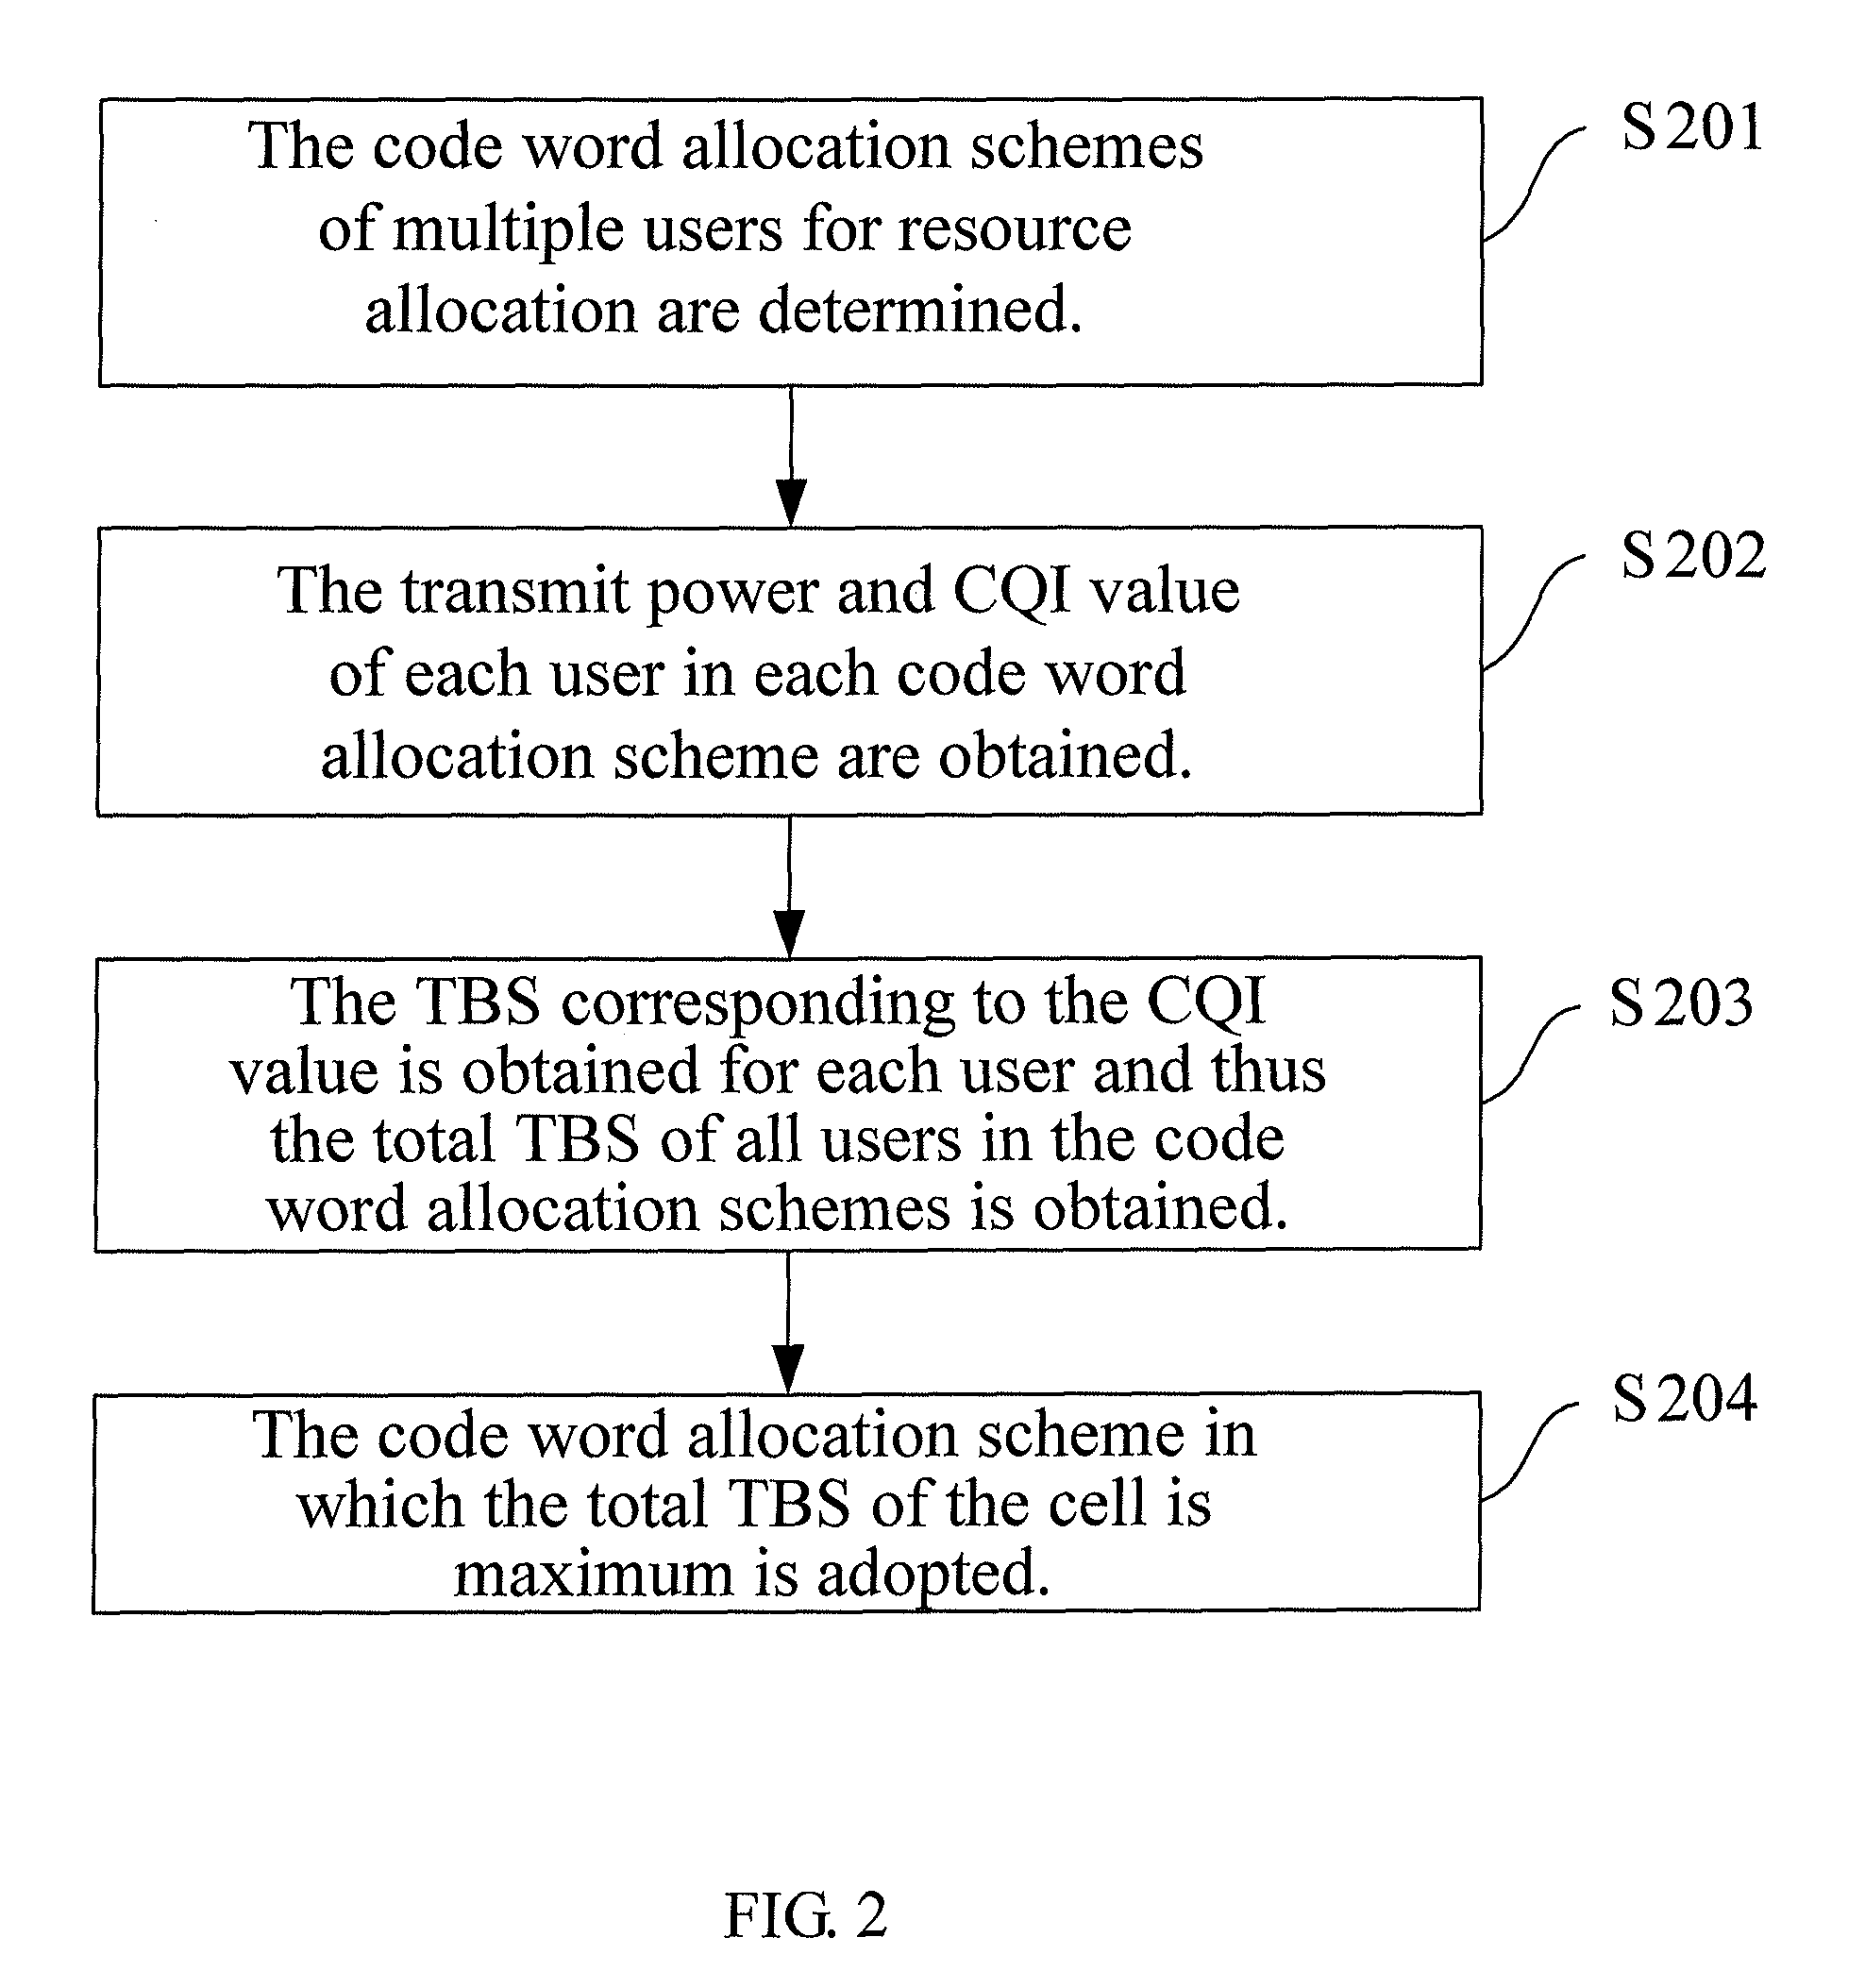 Method and apparatus for allocating resources among multiple users